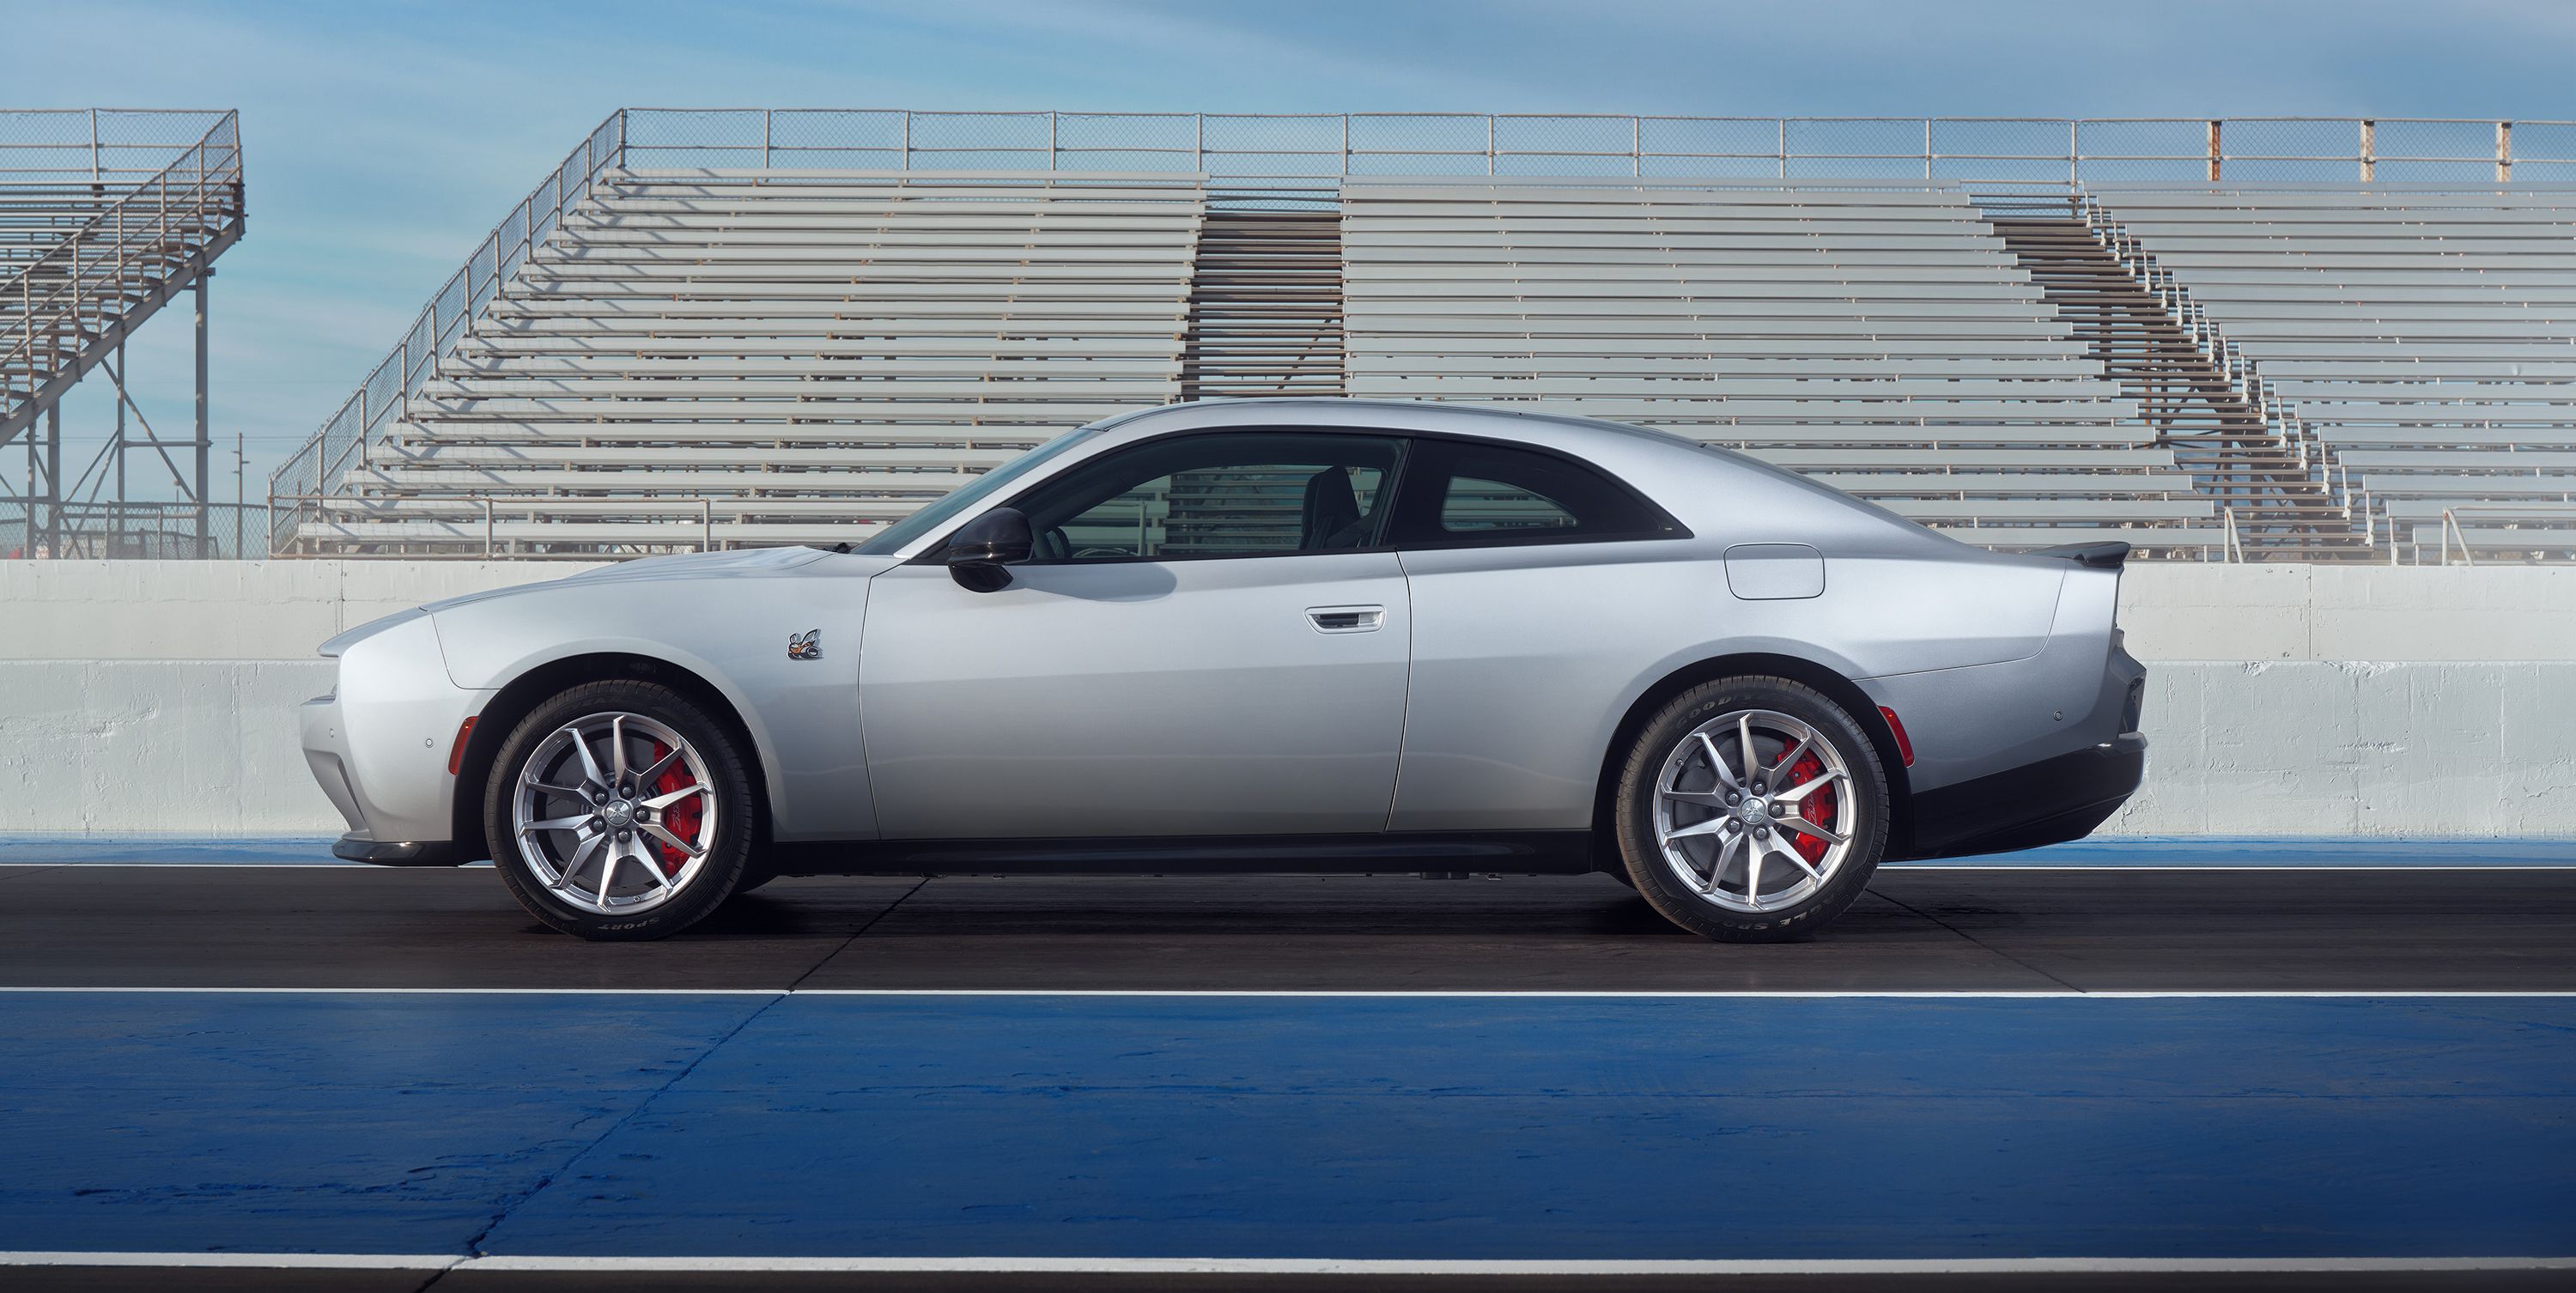 Yes, You Can Do Burnouts in Dodge's New All-Wheel-Drive Chargers